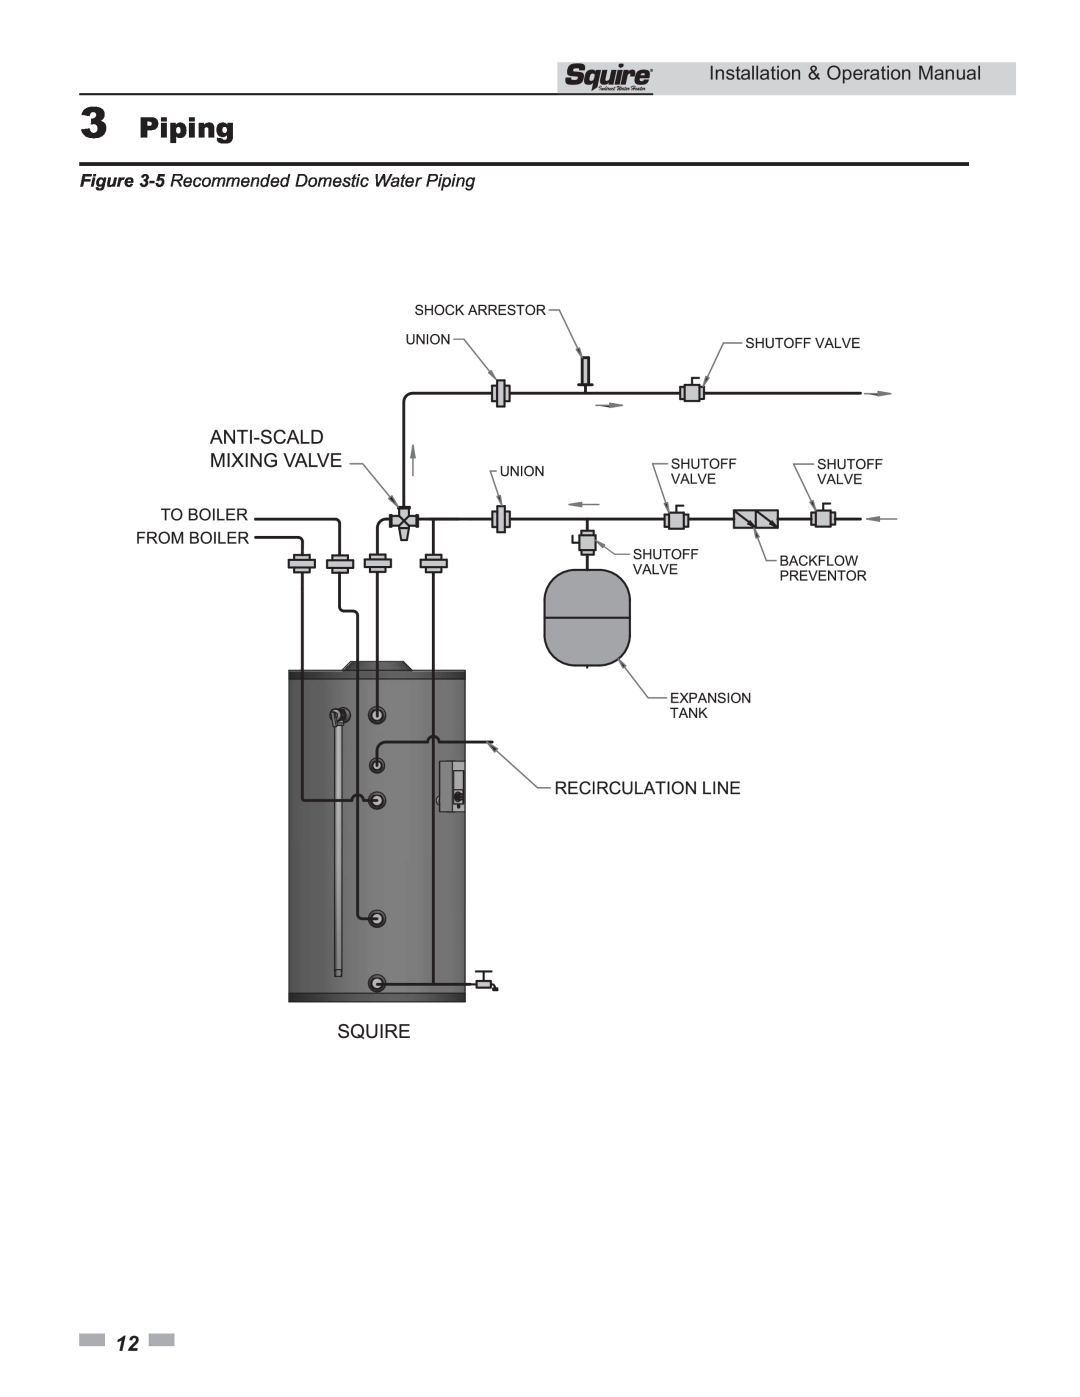 Lochinvar SSS03 operation manual 5 Recommended Domestic Water Piping, 3Piping 